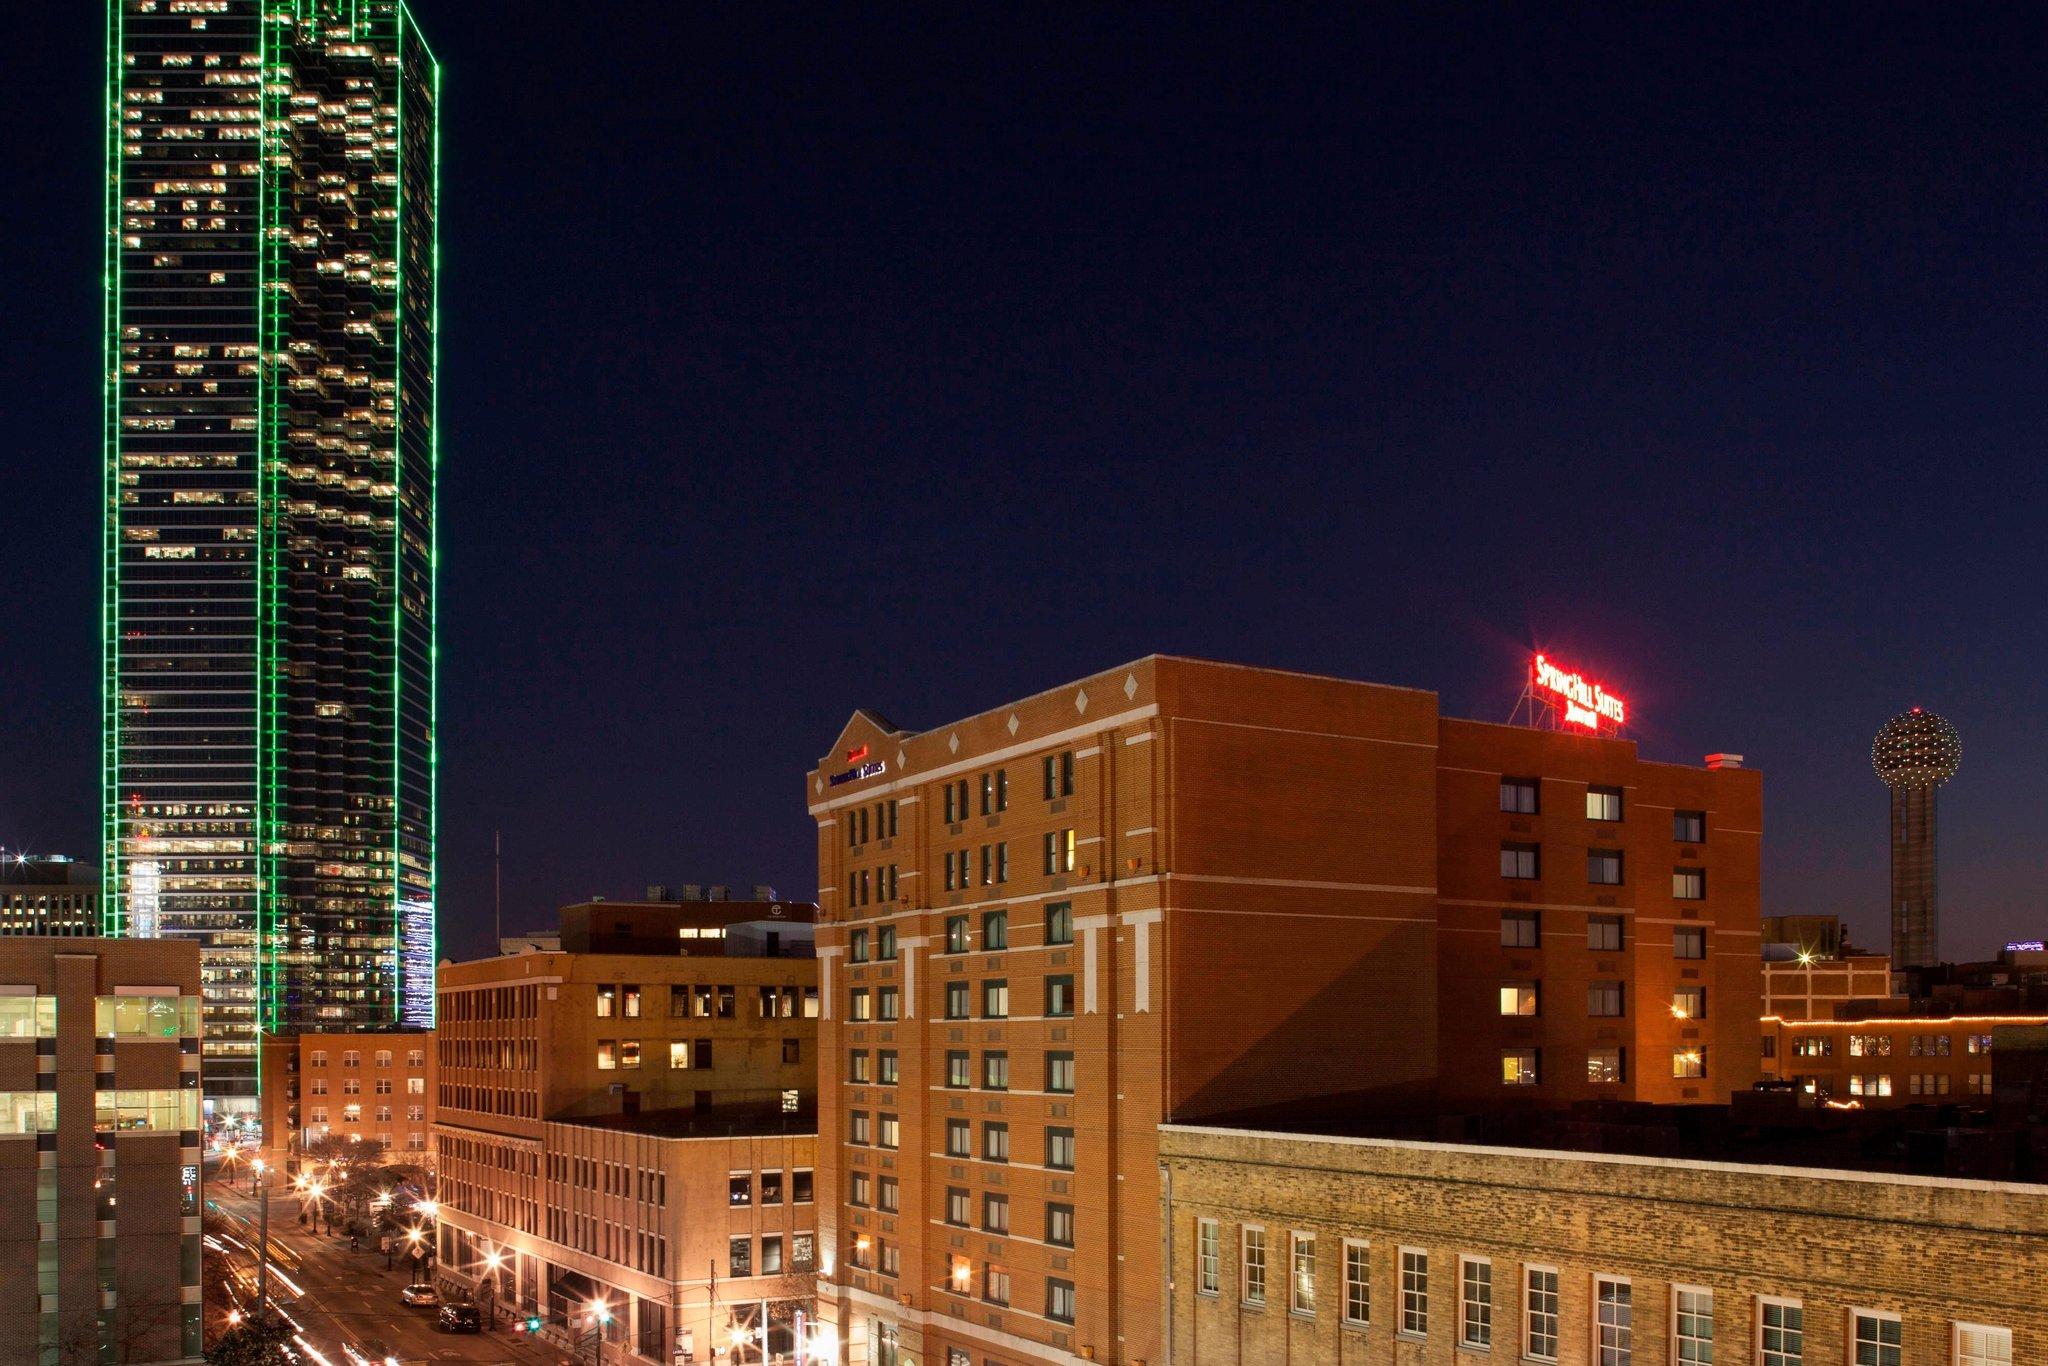 SpringHill Suites Dallas Downtown/West End in Dallas, TX